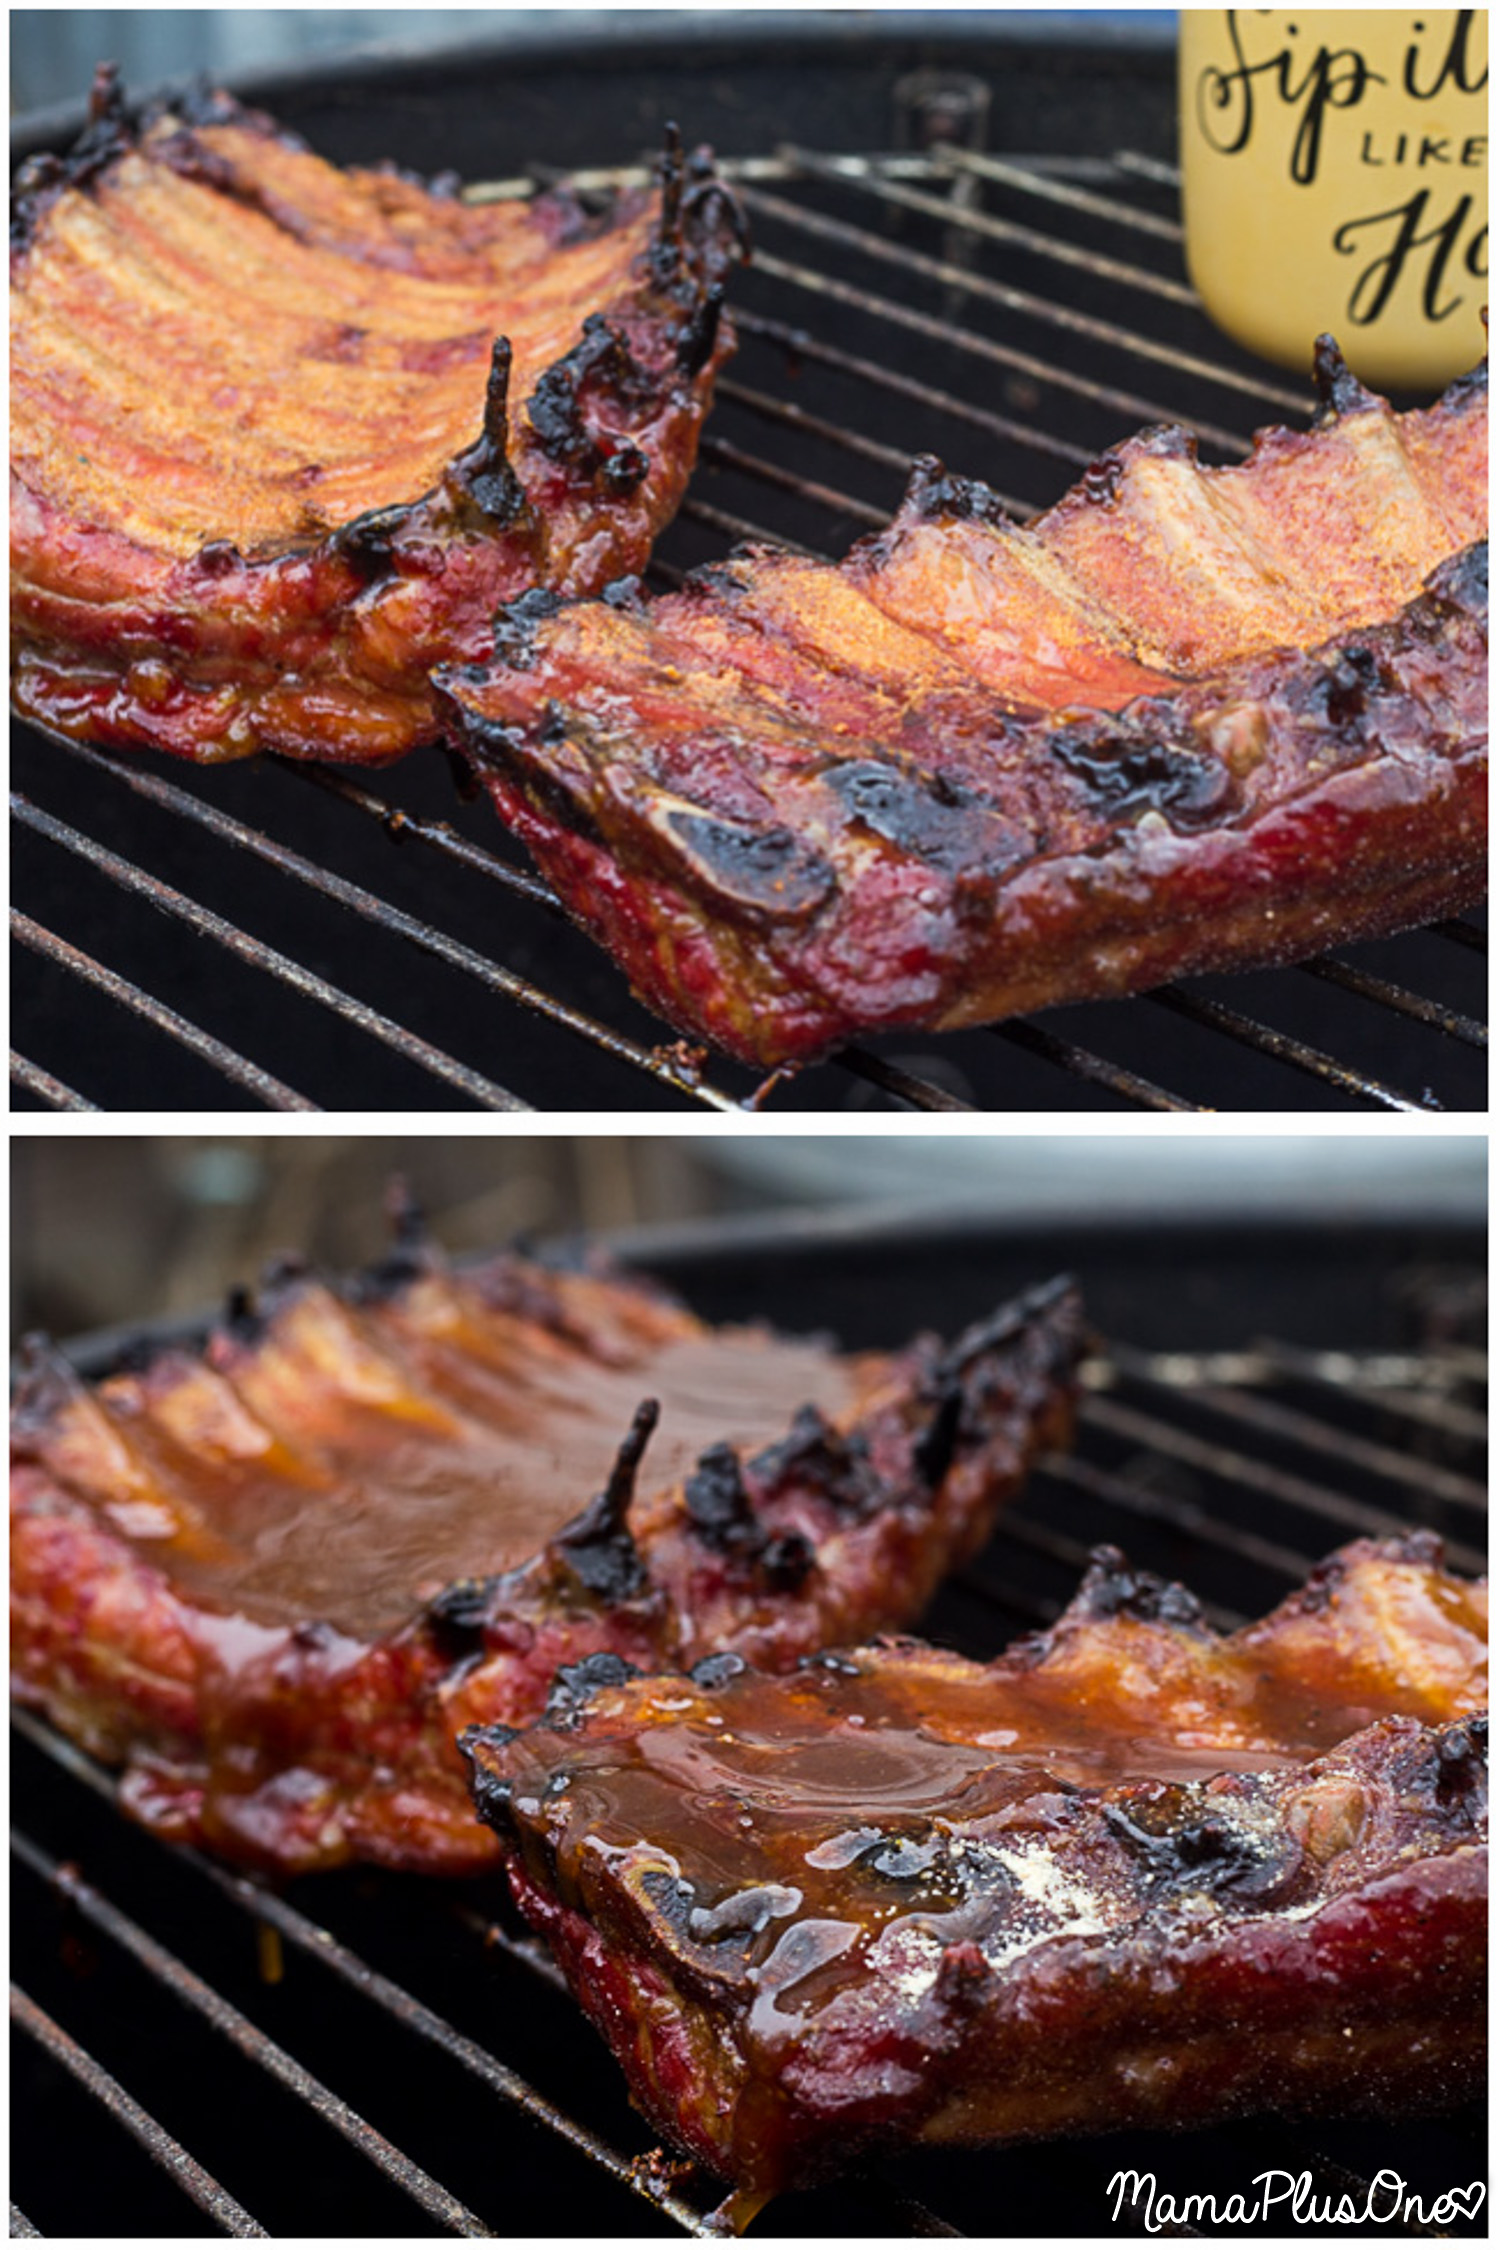 Skip the ham or lamb this Easter... Ribs are where it's at! These caramel ribs are prepared with a delicious savory-sweet caramel sauce and slow grilled until they're practically falling off of the bone. You'll love the ginger, brown sugar, and buttery flavor of this rib dinner, and your family will be licking their fingers at the end. If you love grilled ribs, you're going to love these caramel ribs on Easter Sunday. They'll grill up perfectly with the extra juicy Smithfield ribs. #GetGrillingAmerica [ad]